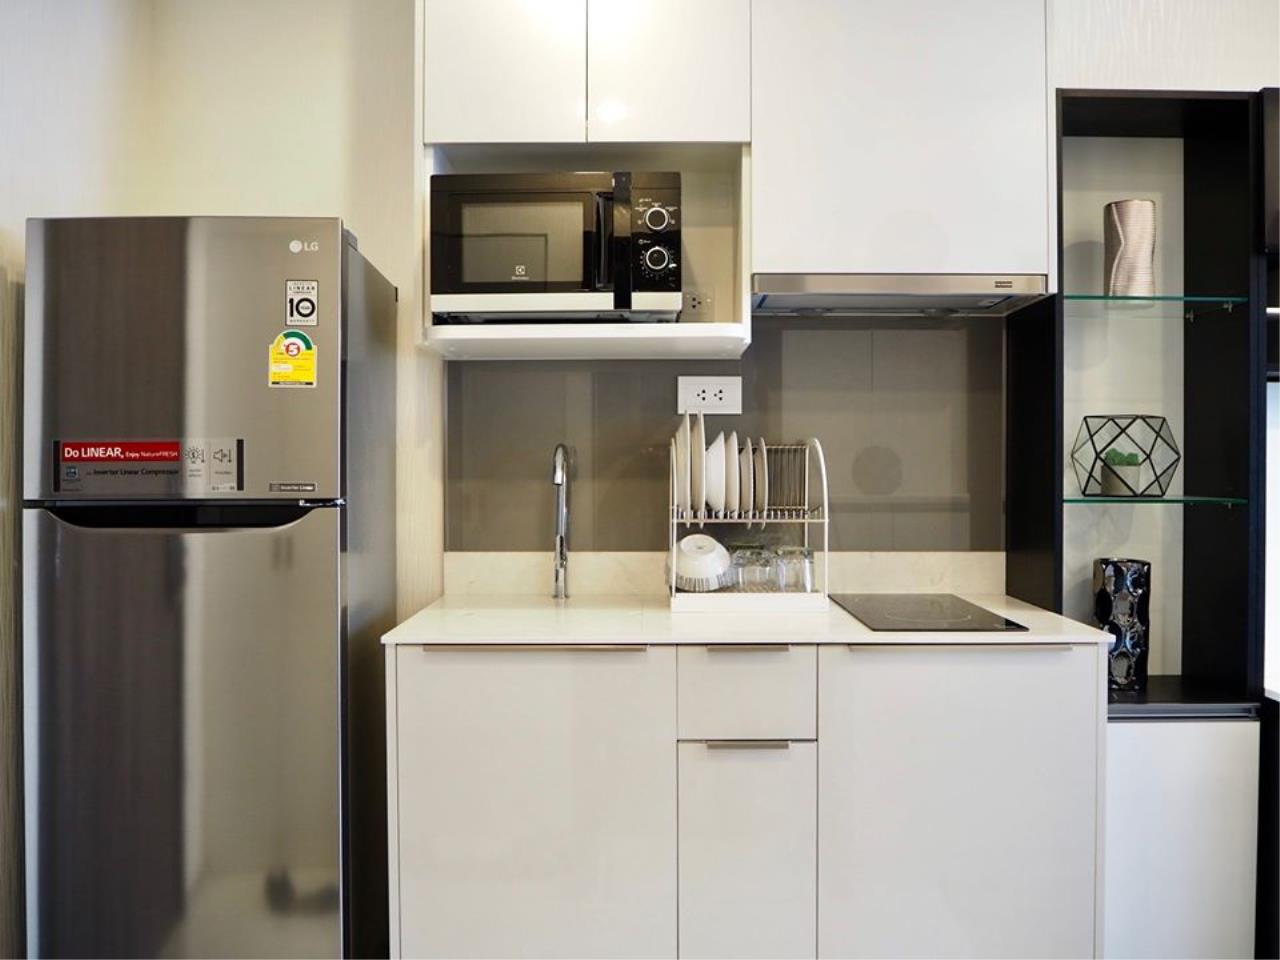 Agent Thawanrat Agency's Condo for rental Ideo Mobi Sukhumvit 66 Near BTS. Udom Suk 1 bedroom,1 bathroom. size 35 sqm.Floor 20 th. fully furnished Ready to move in 2